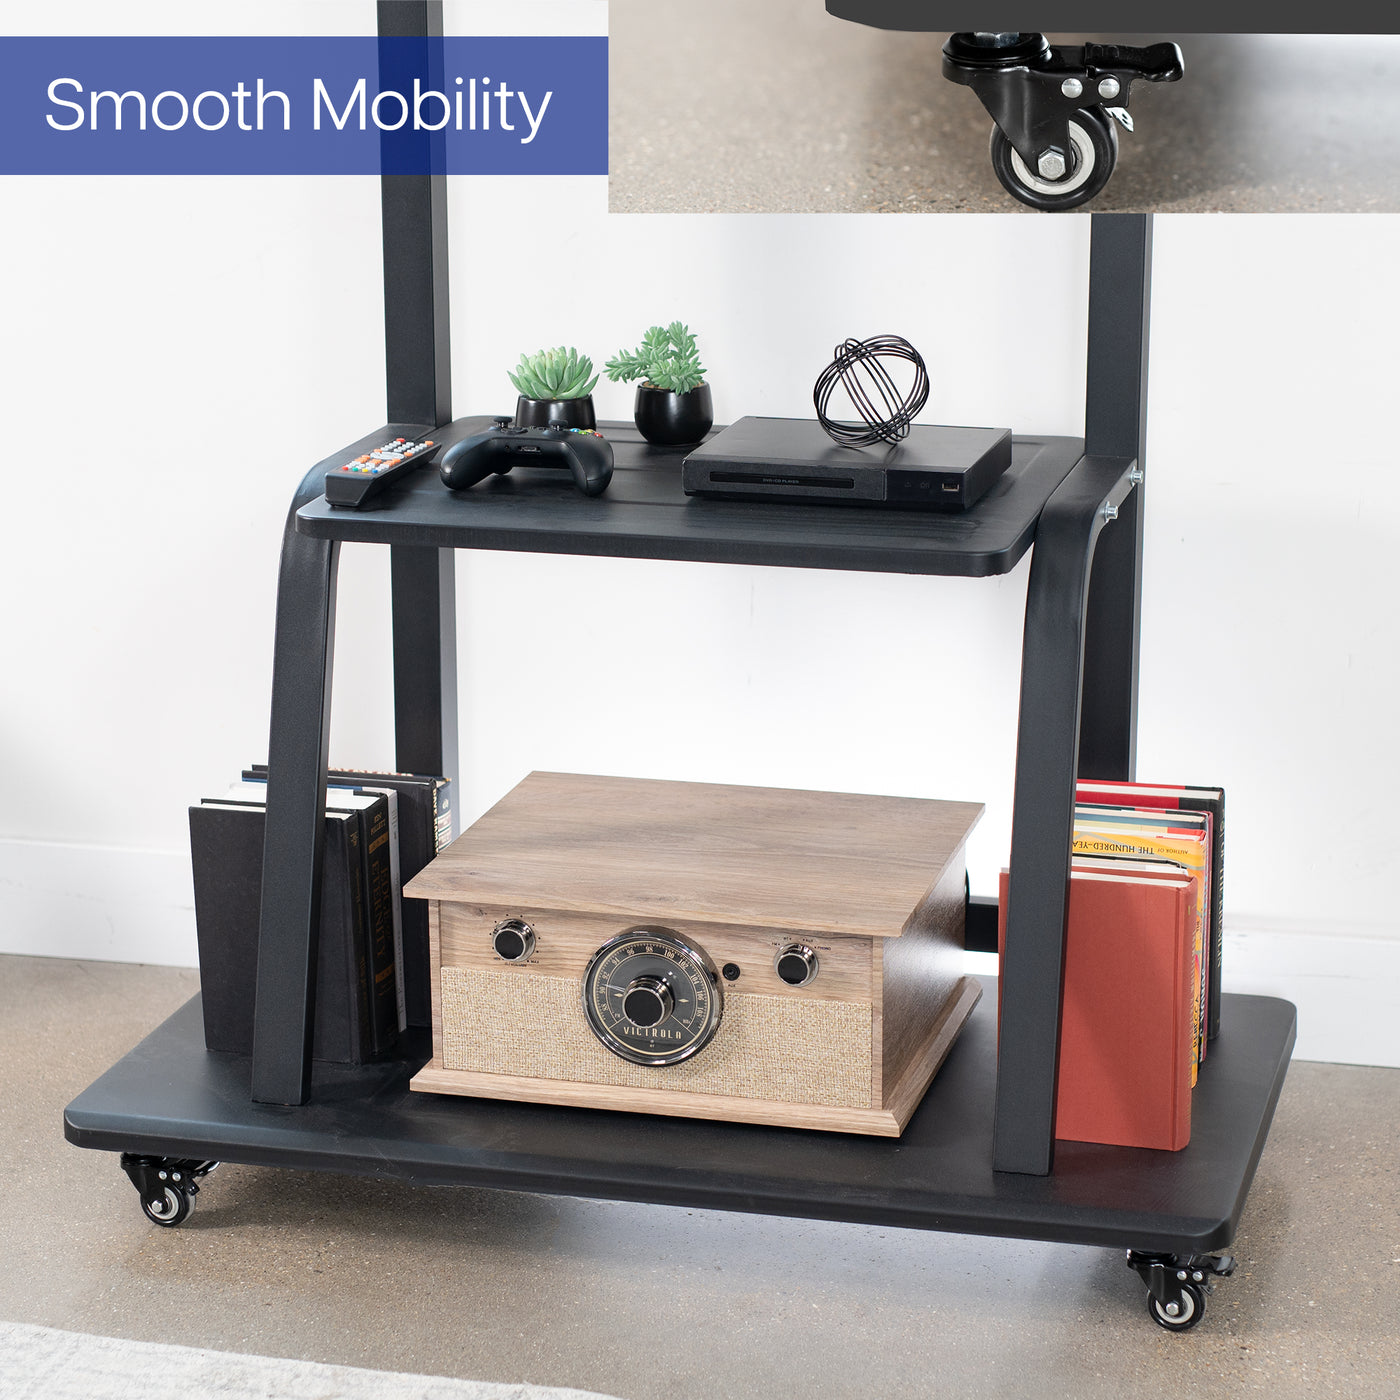 TV stand with a stable base and locking caster wheels providing smooth mobility.